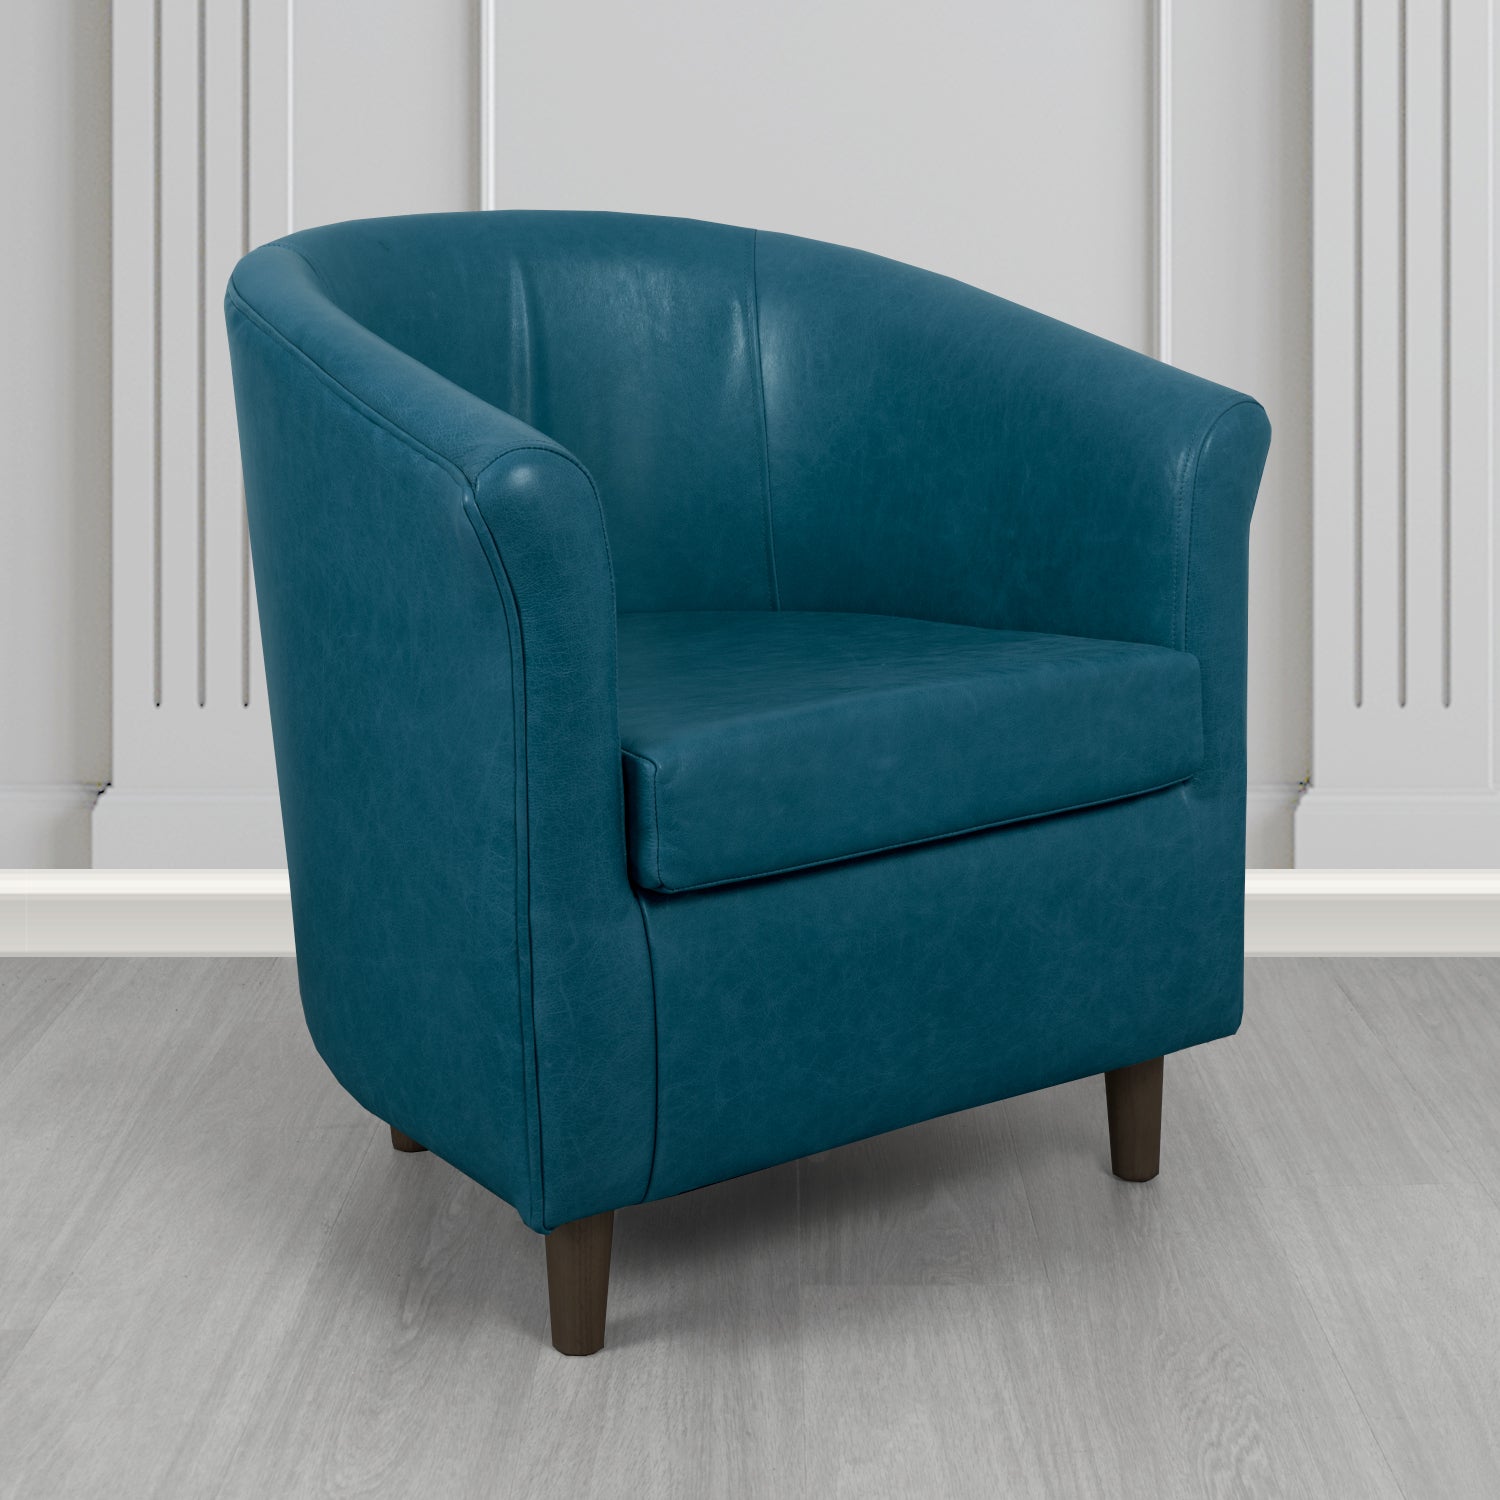 Tuscany Tub Chair in Crib 5 Old English Peacock Blue Genuine Leather - The Tub Chair Shop